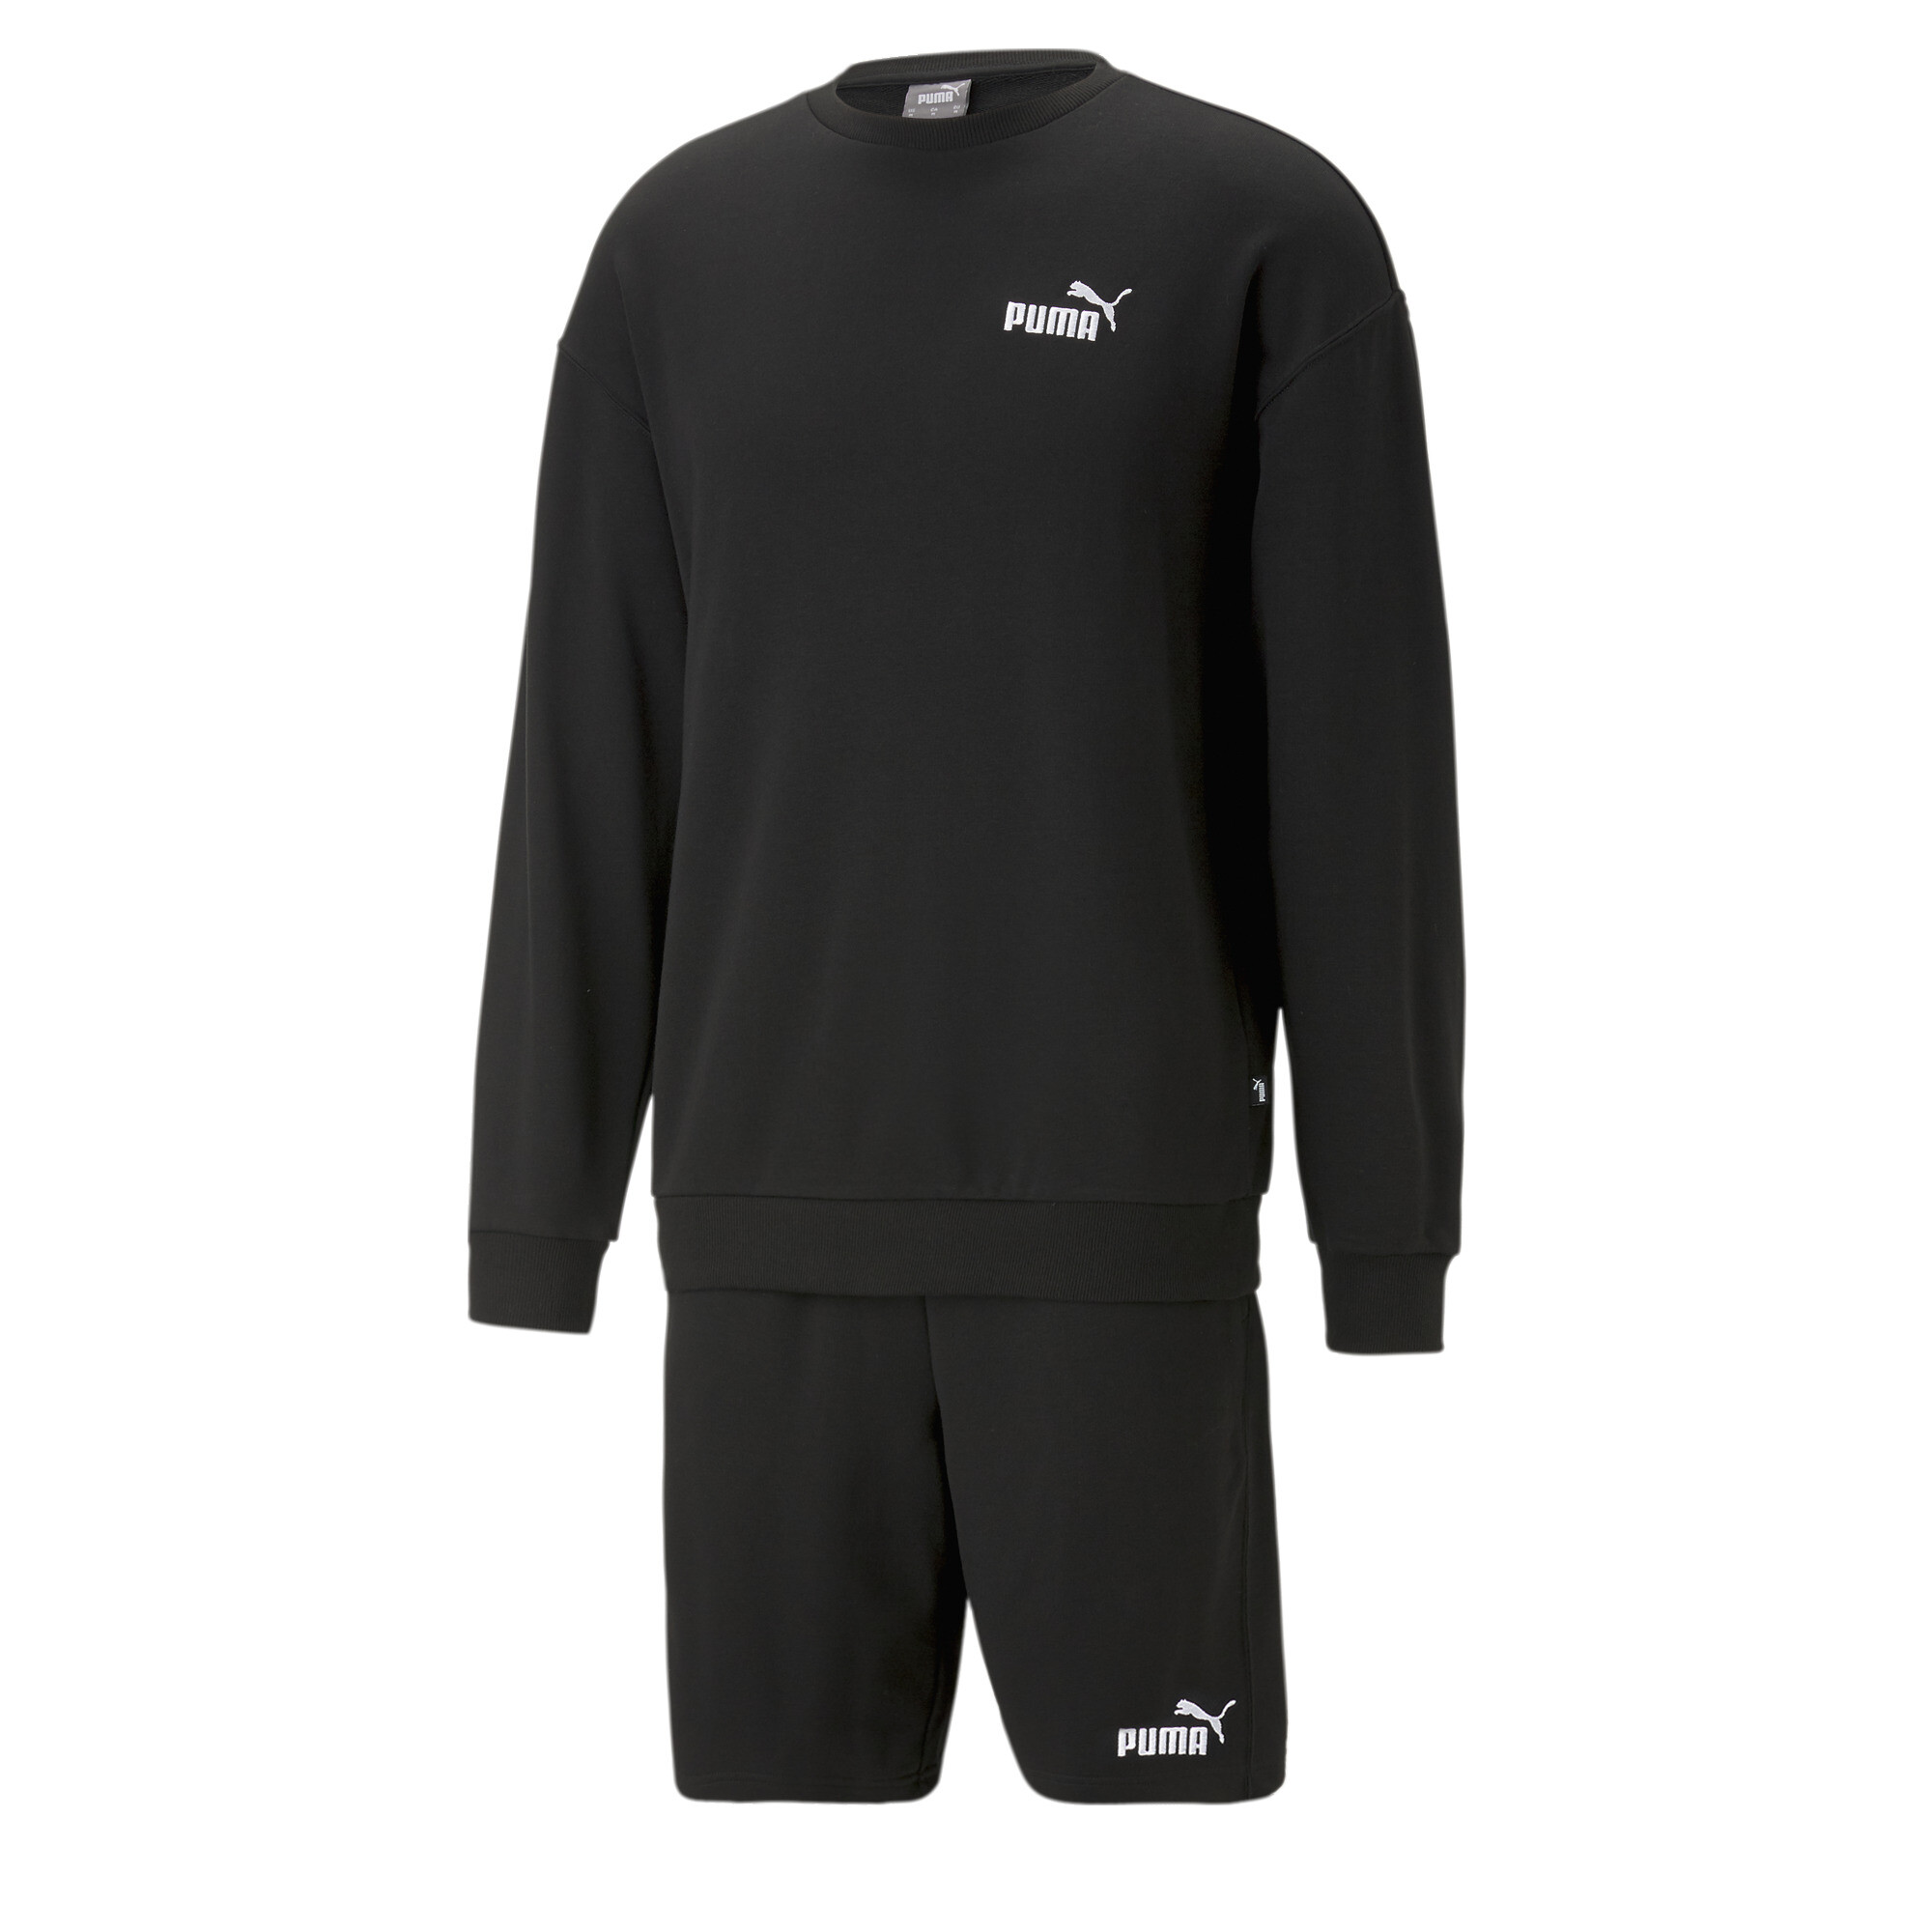 Men's Puma Relaxed Sweatsuit, Black, Size XL, Clothing